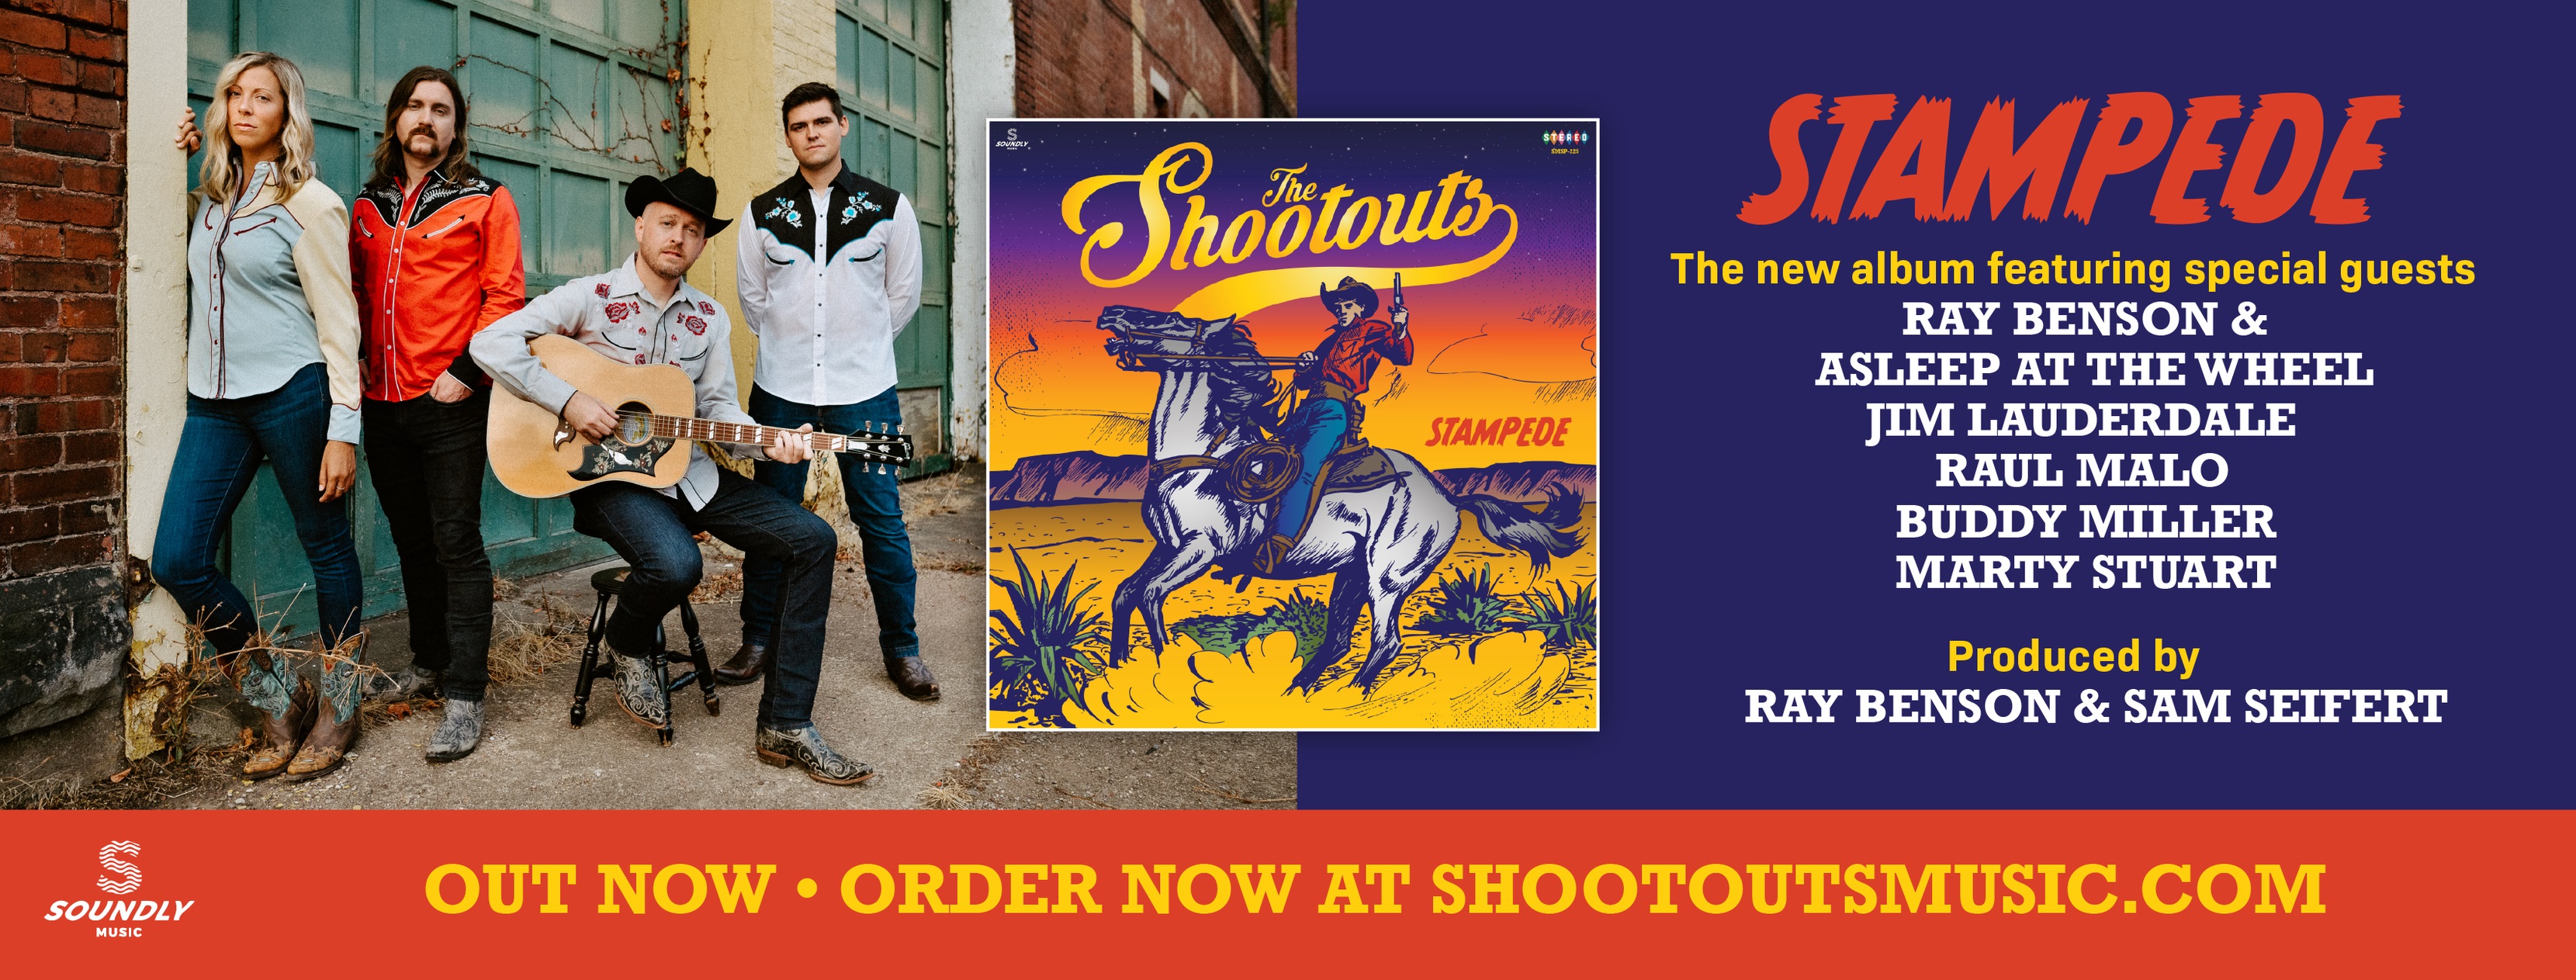 Grateful Web Interview with The Shootouts